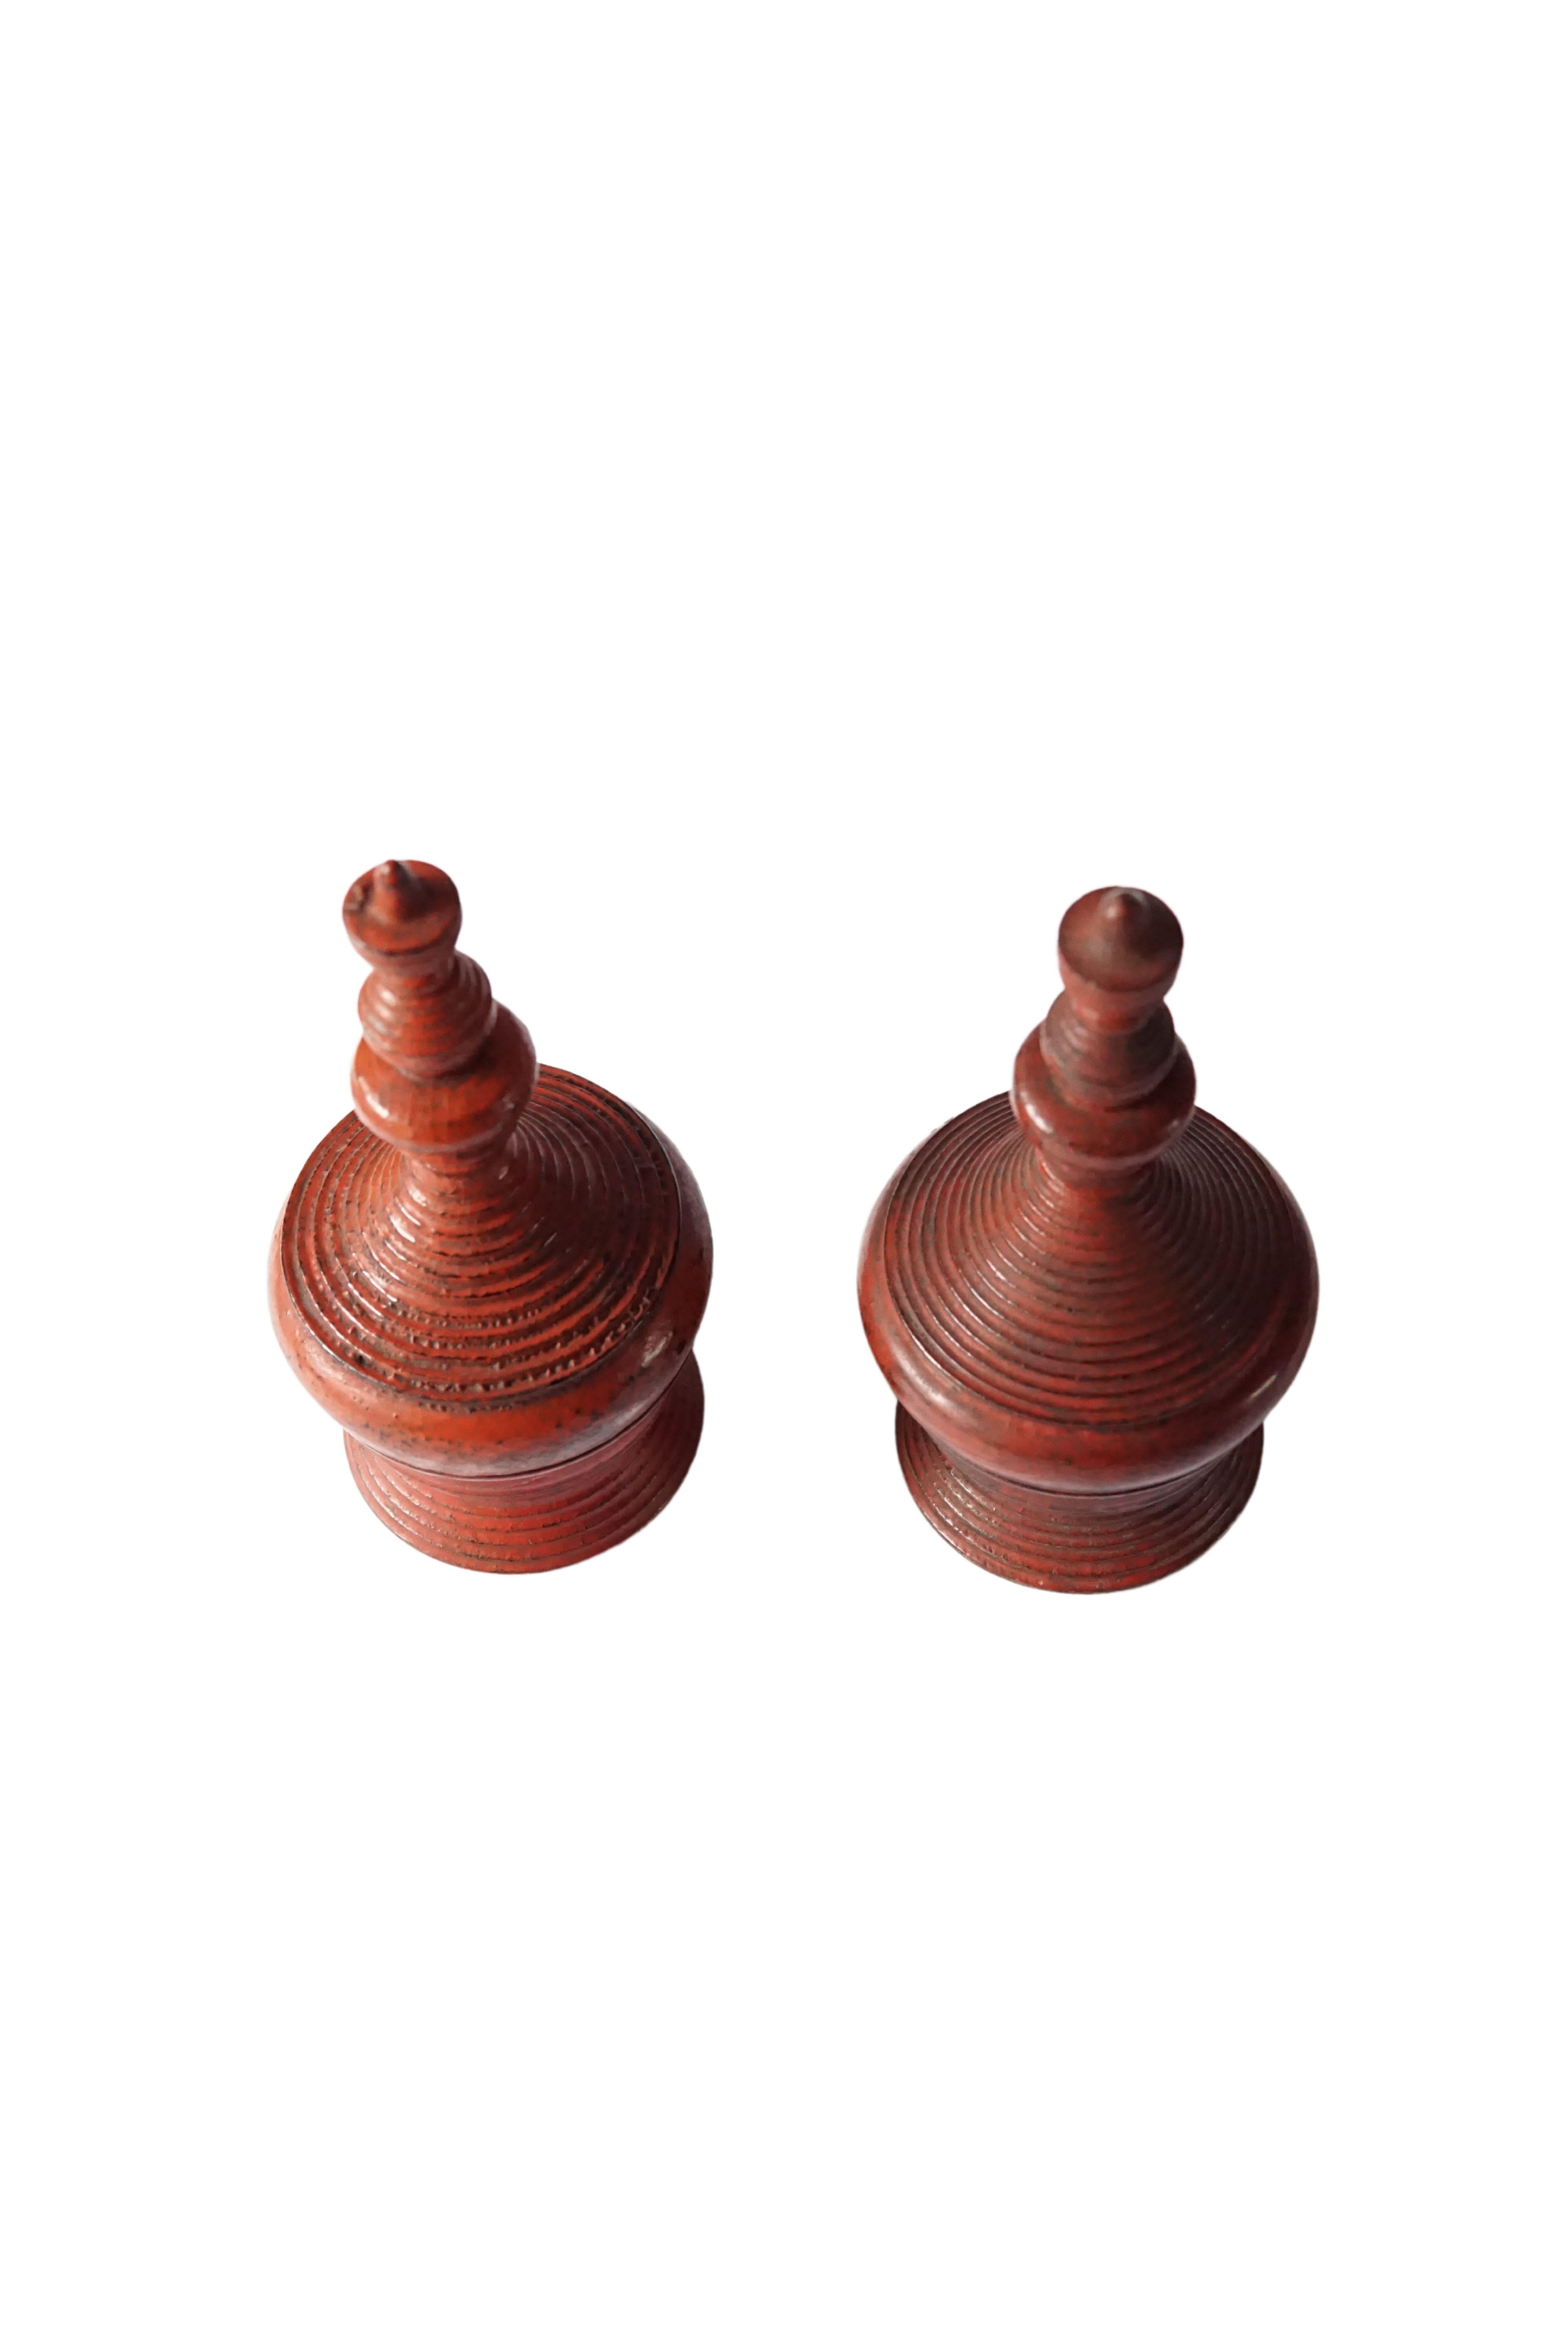 This pair of Lacquered Offering Vessels are know in Myanmar as 